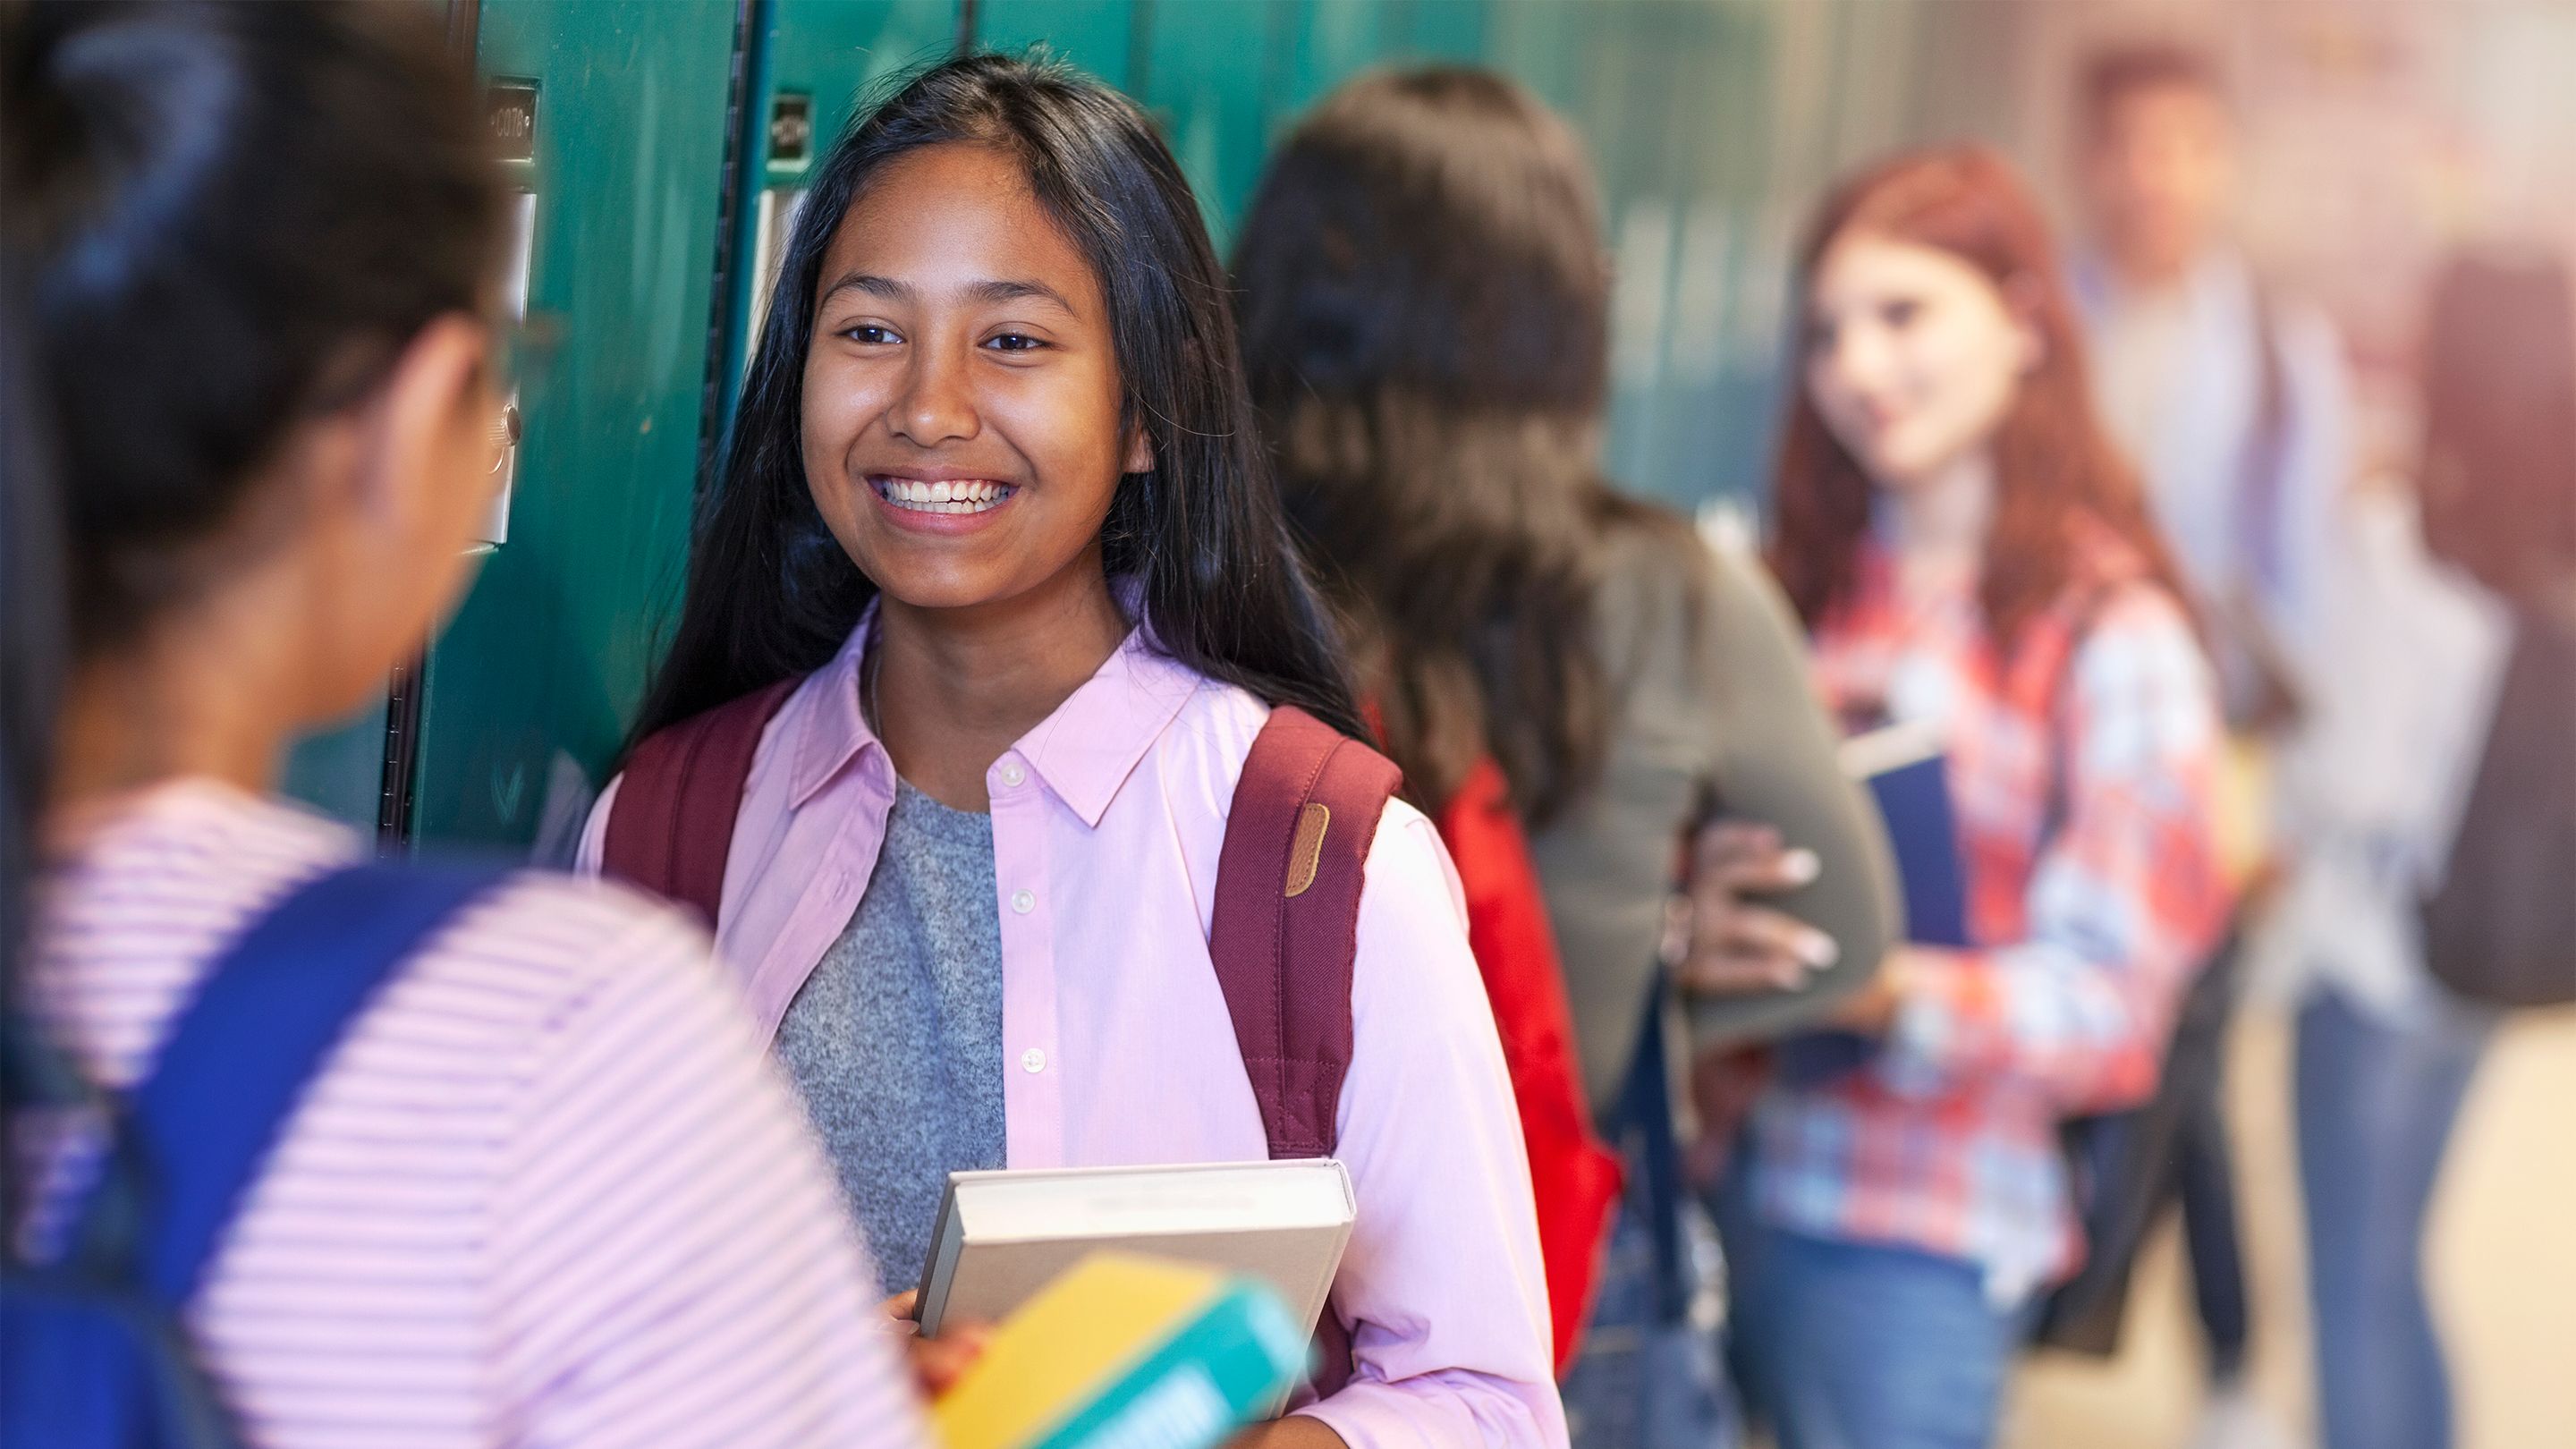 Tips for Fostering Healthy Integration of Newcomer Students in U.S. Schools | Edutopia